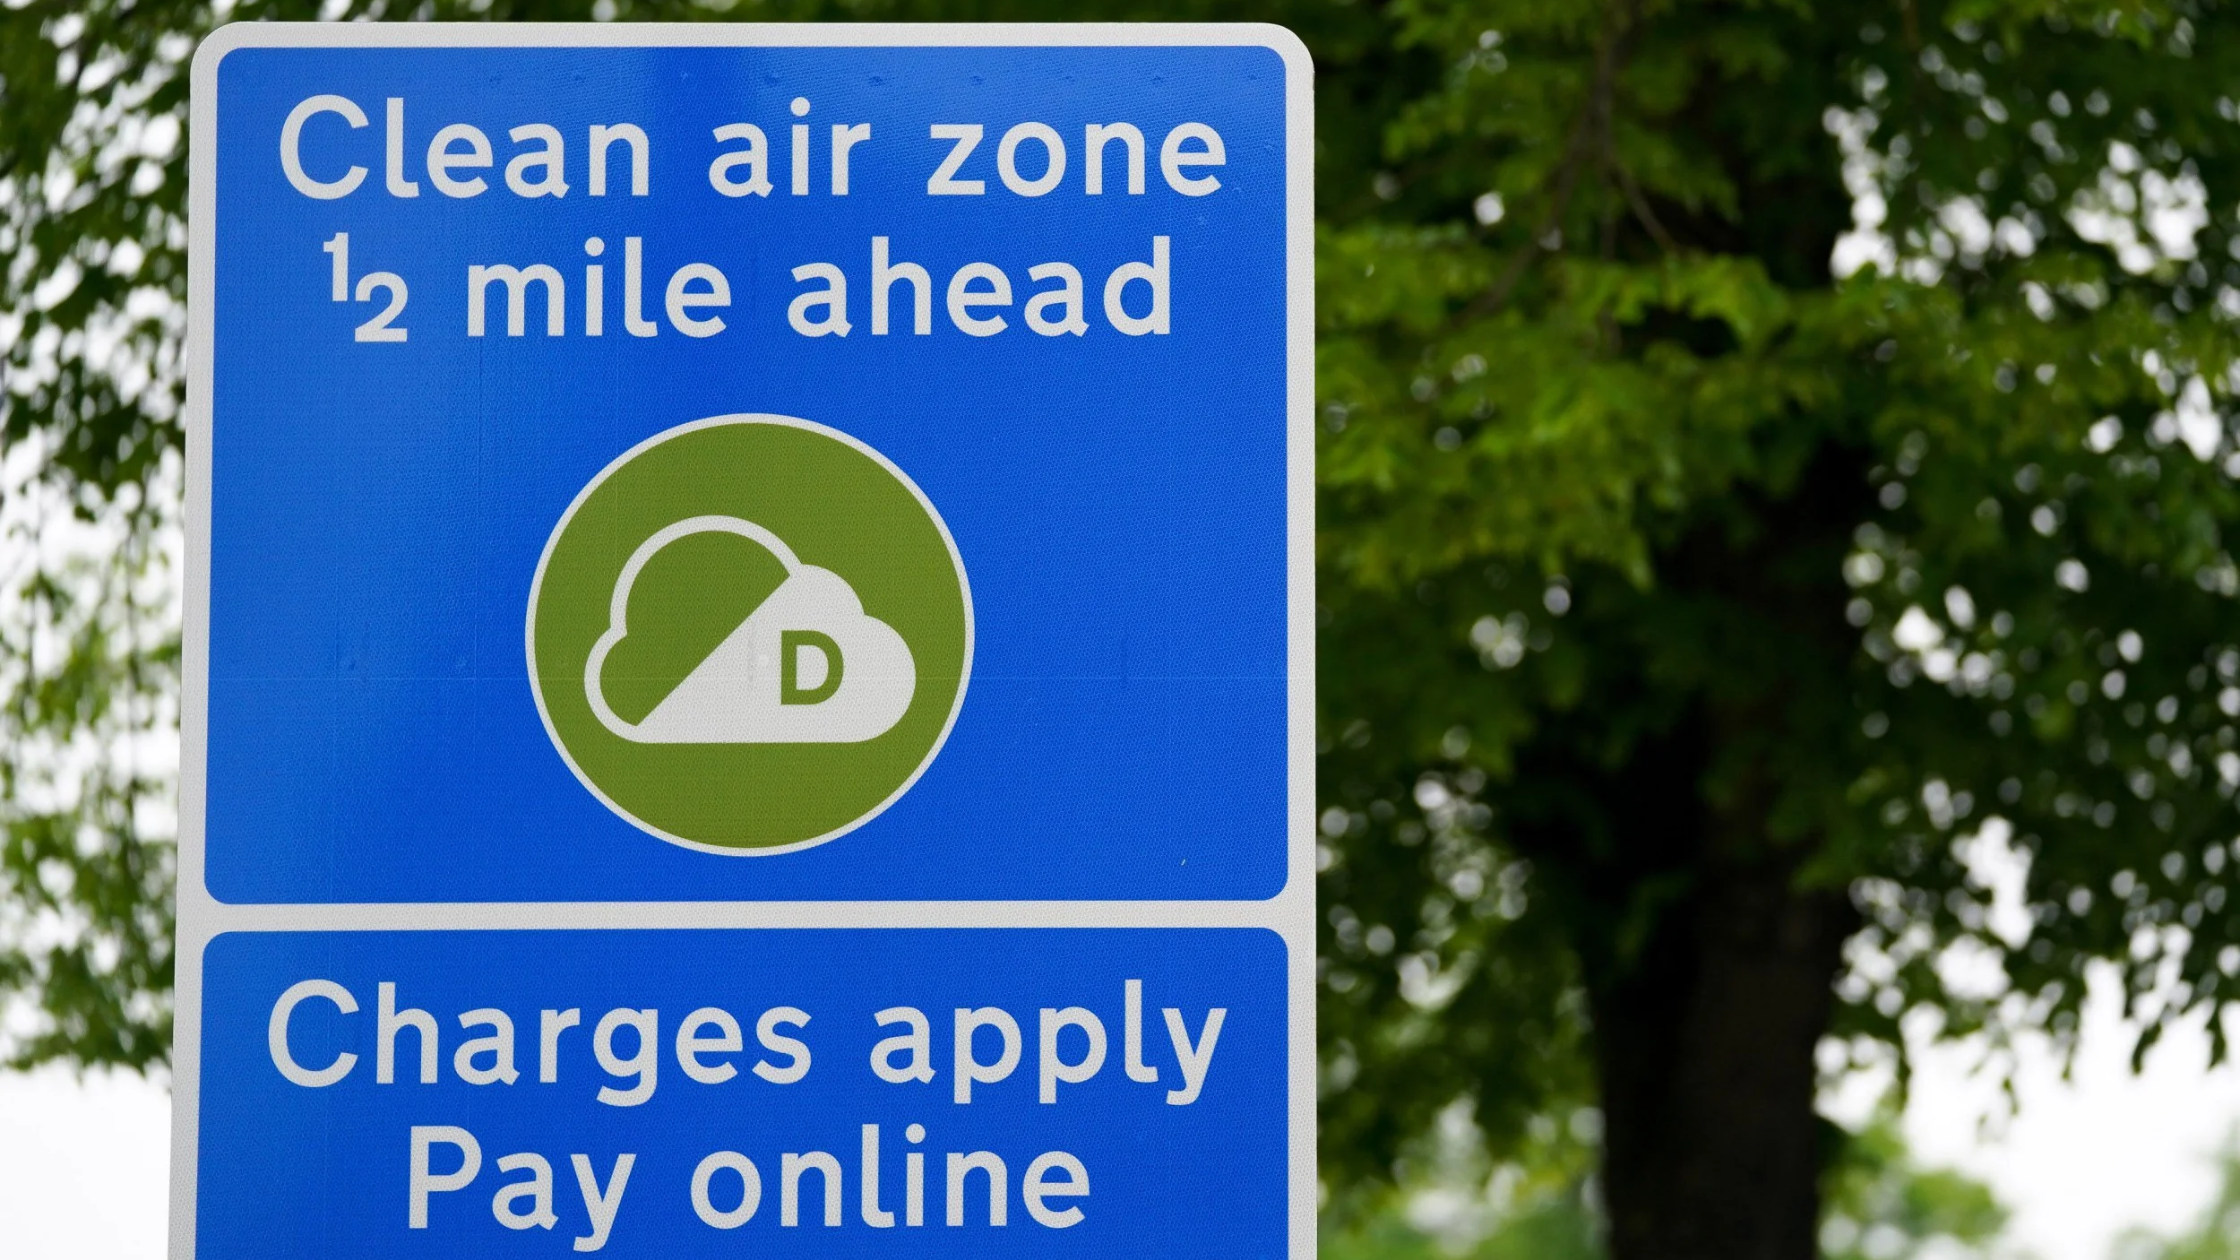 Bristol's Clean Air Zone is up and running